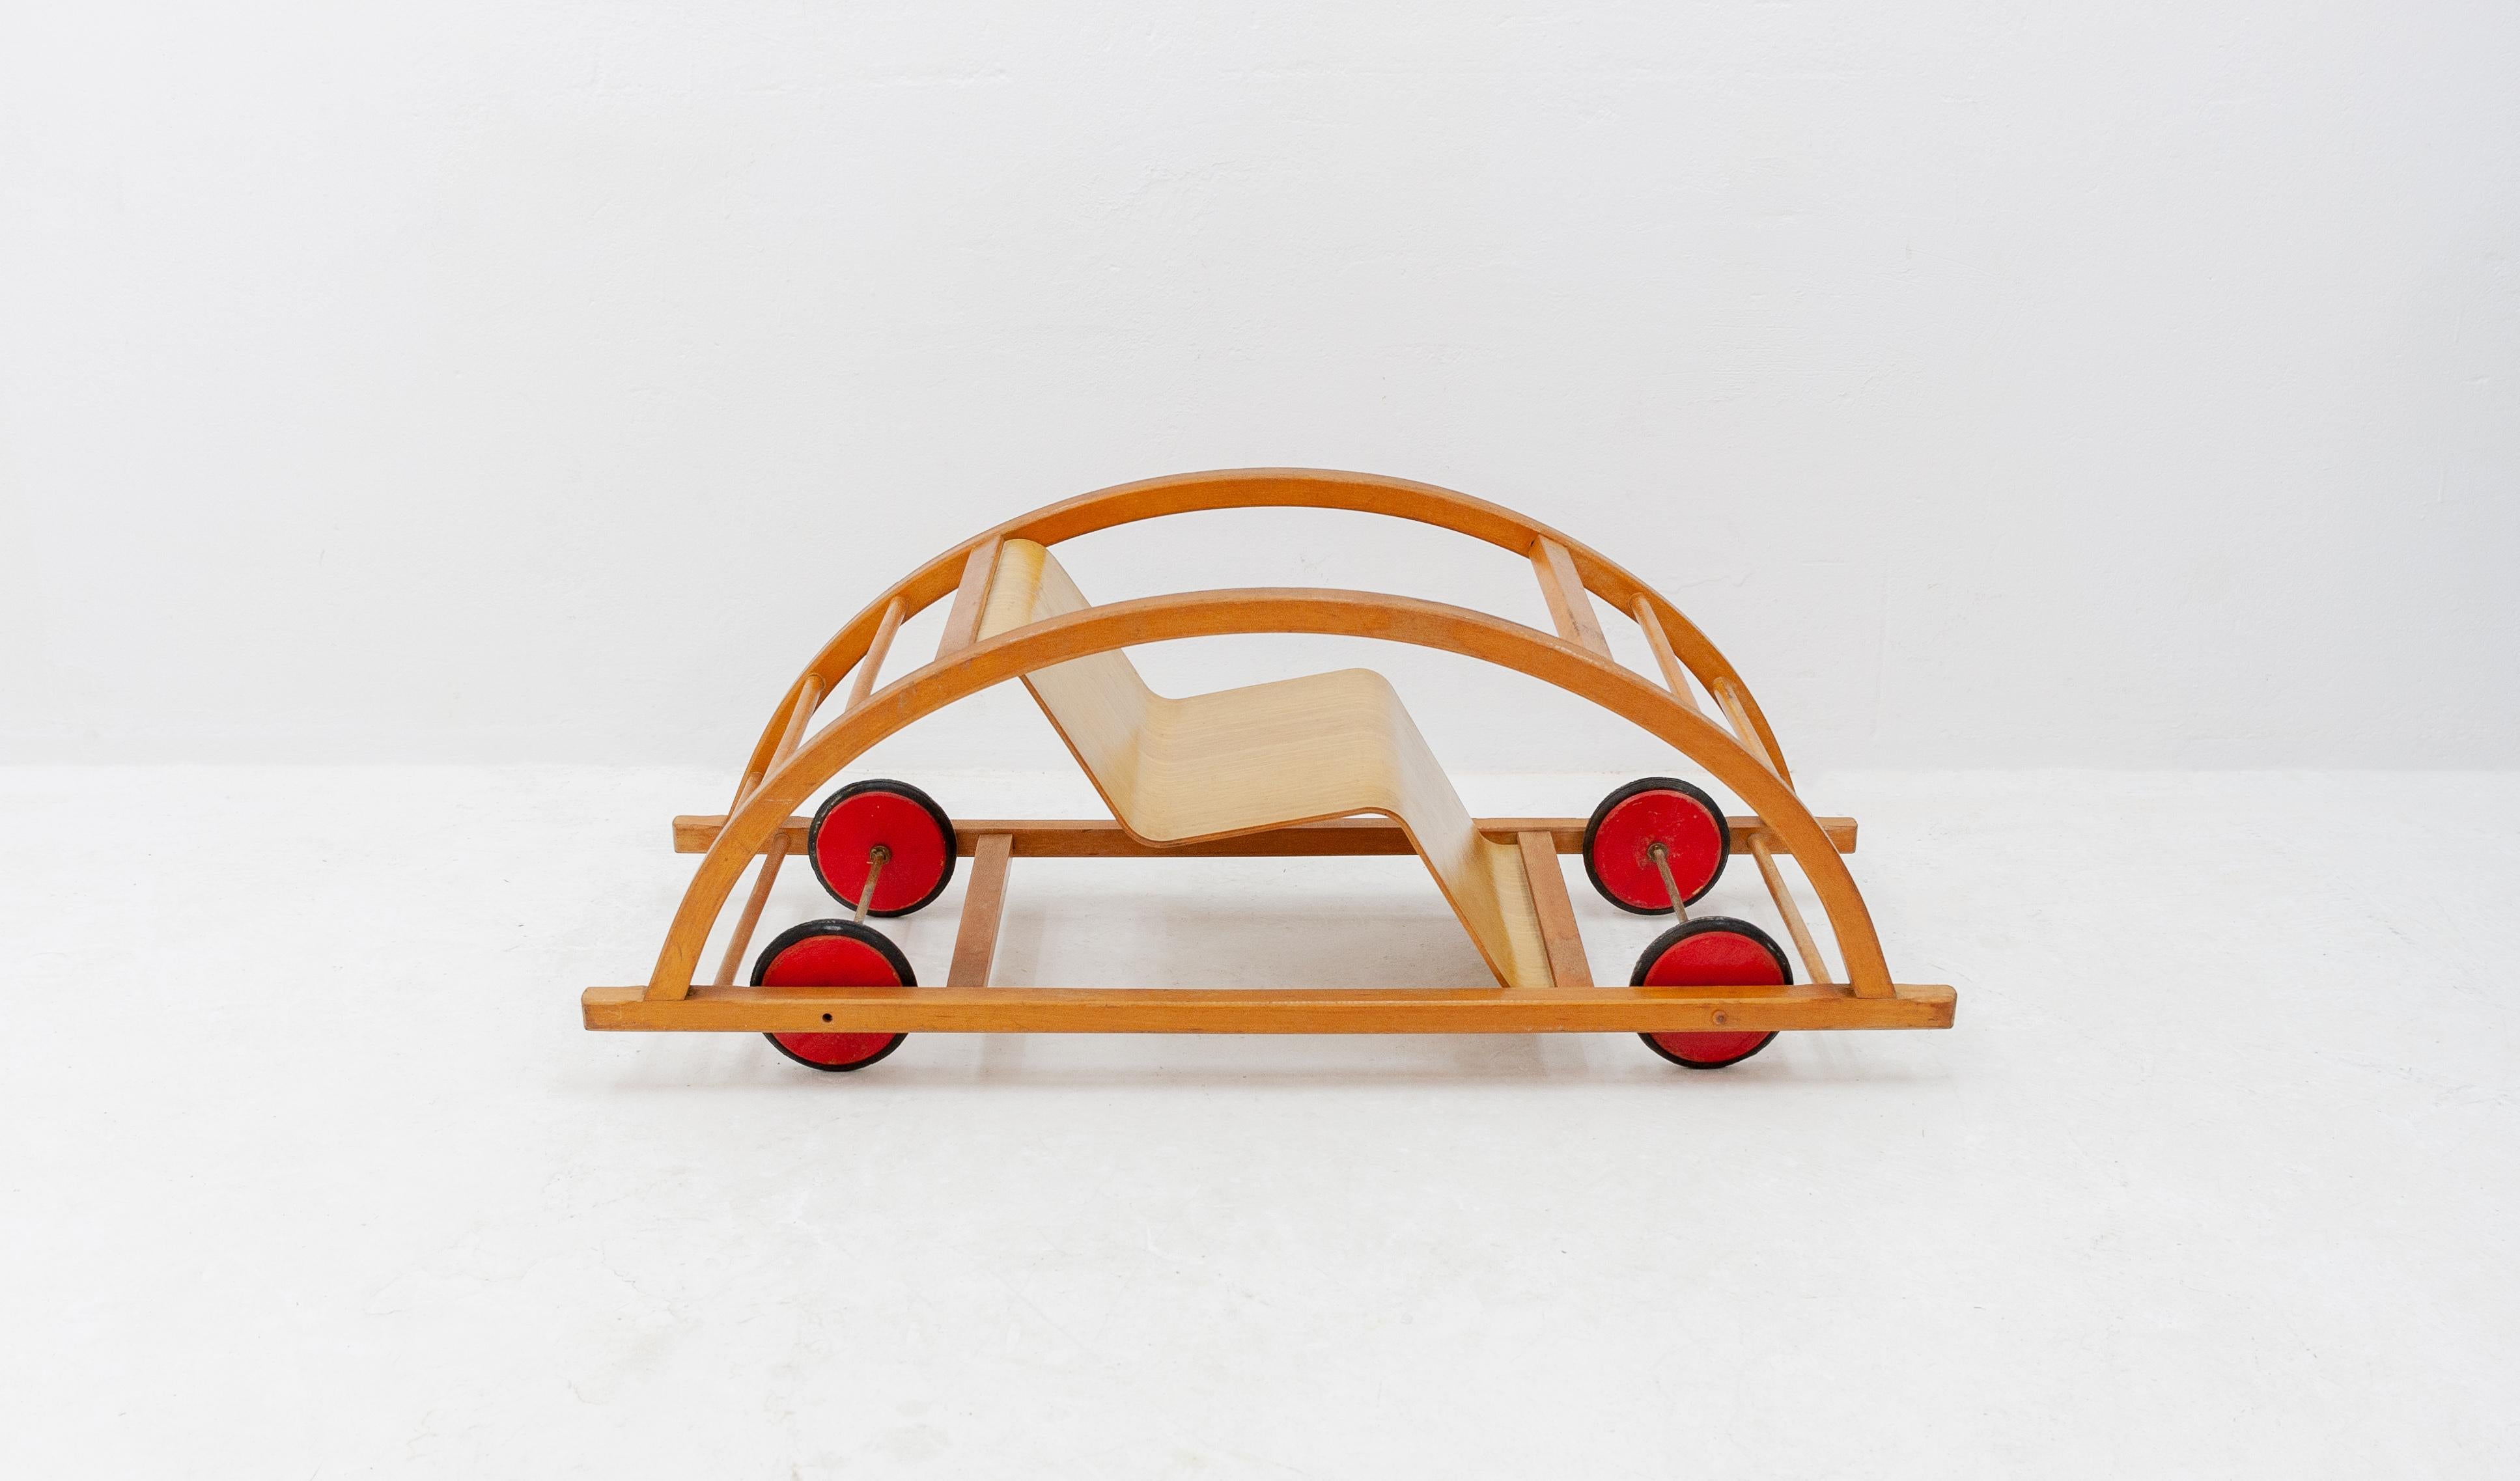 A beautiful and completely original Schaukelwagen with beech plywood seat from 1950 designed by Hans Brockhage and Erwin Andrä under supervision of the Dutch Mart Stam. This vintage walking car can serve as a seesaw when flipped over and is in